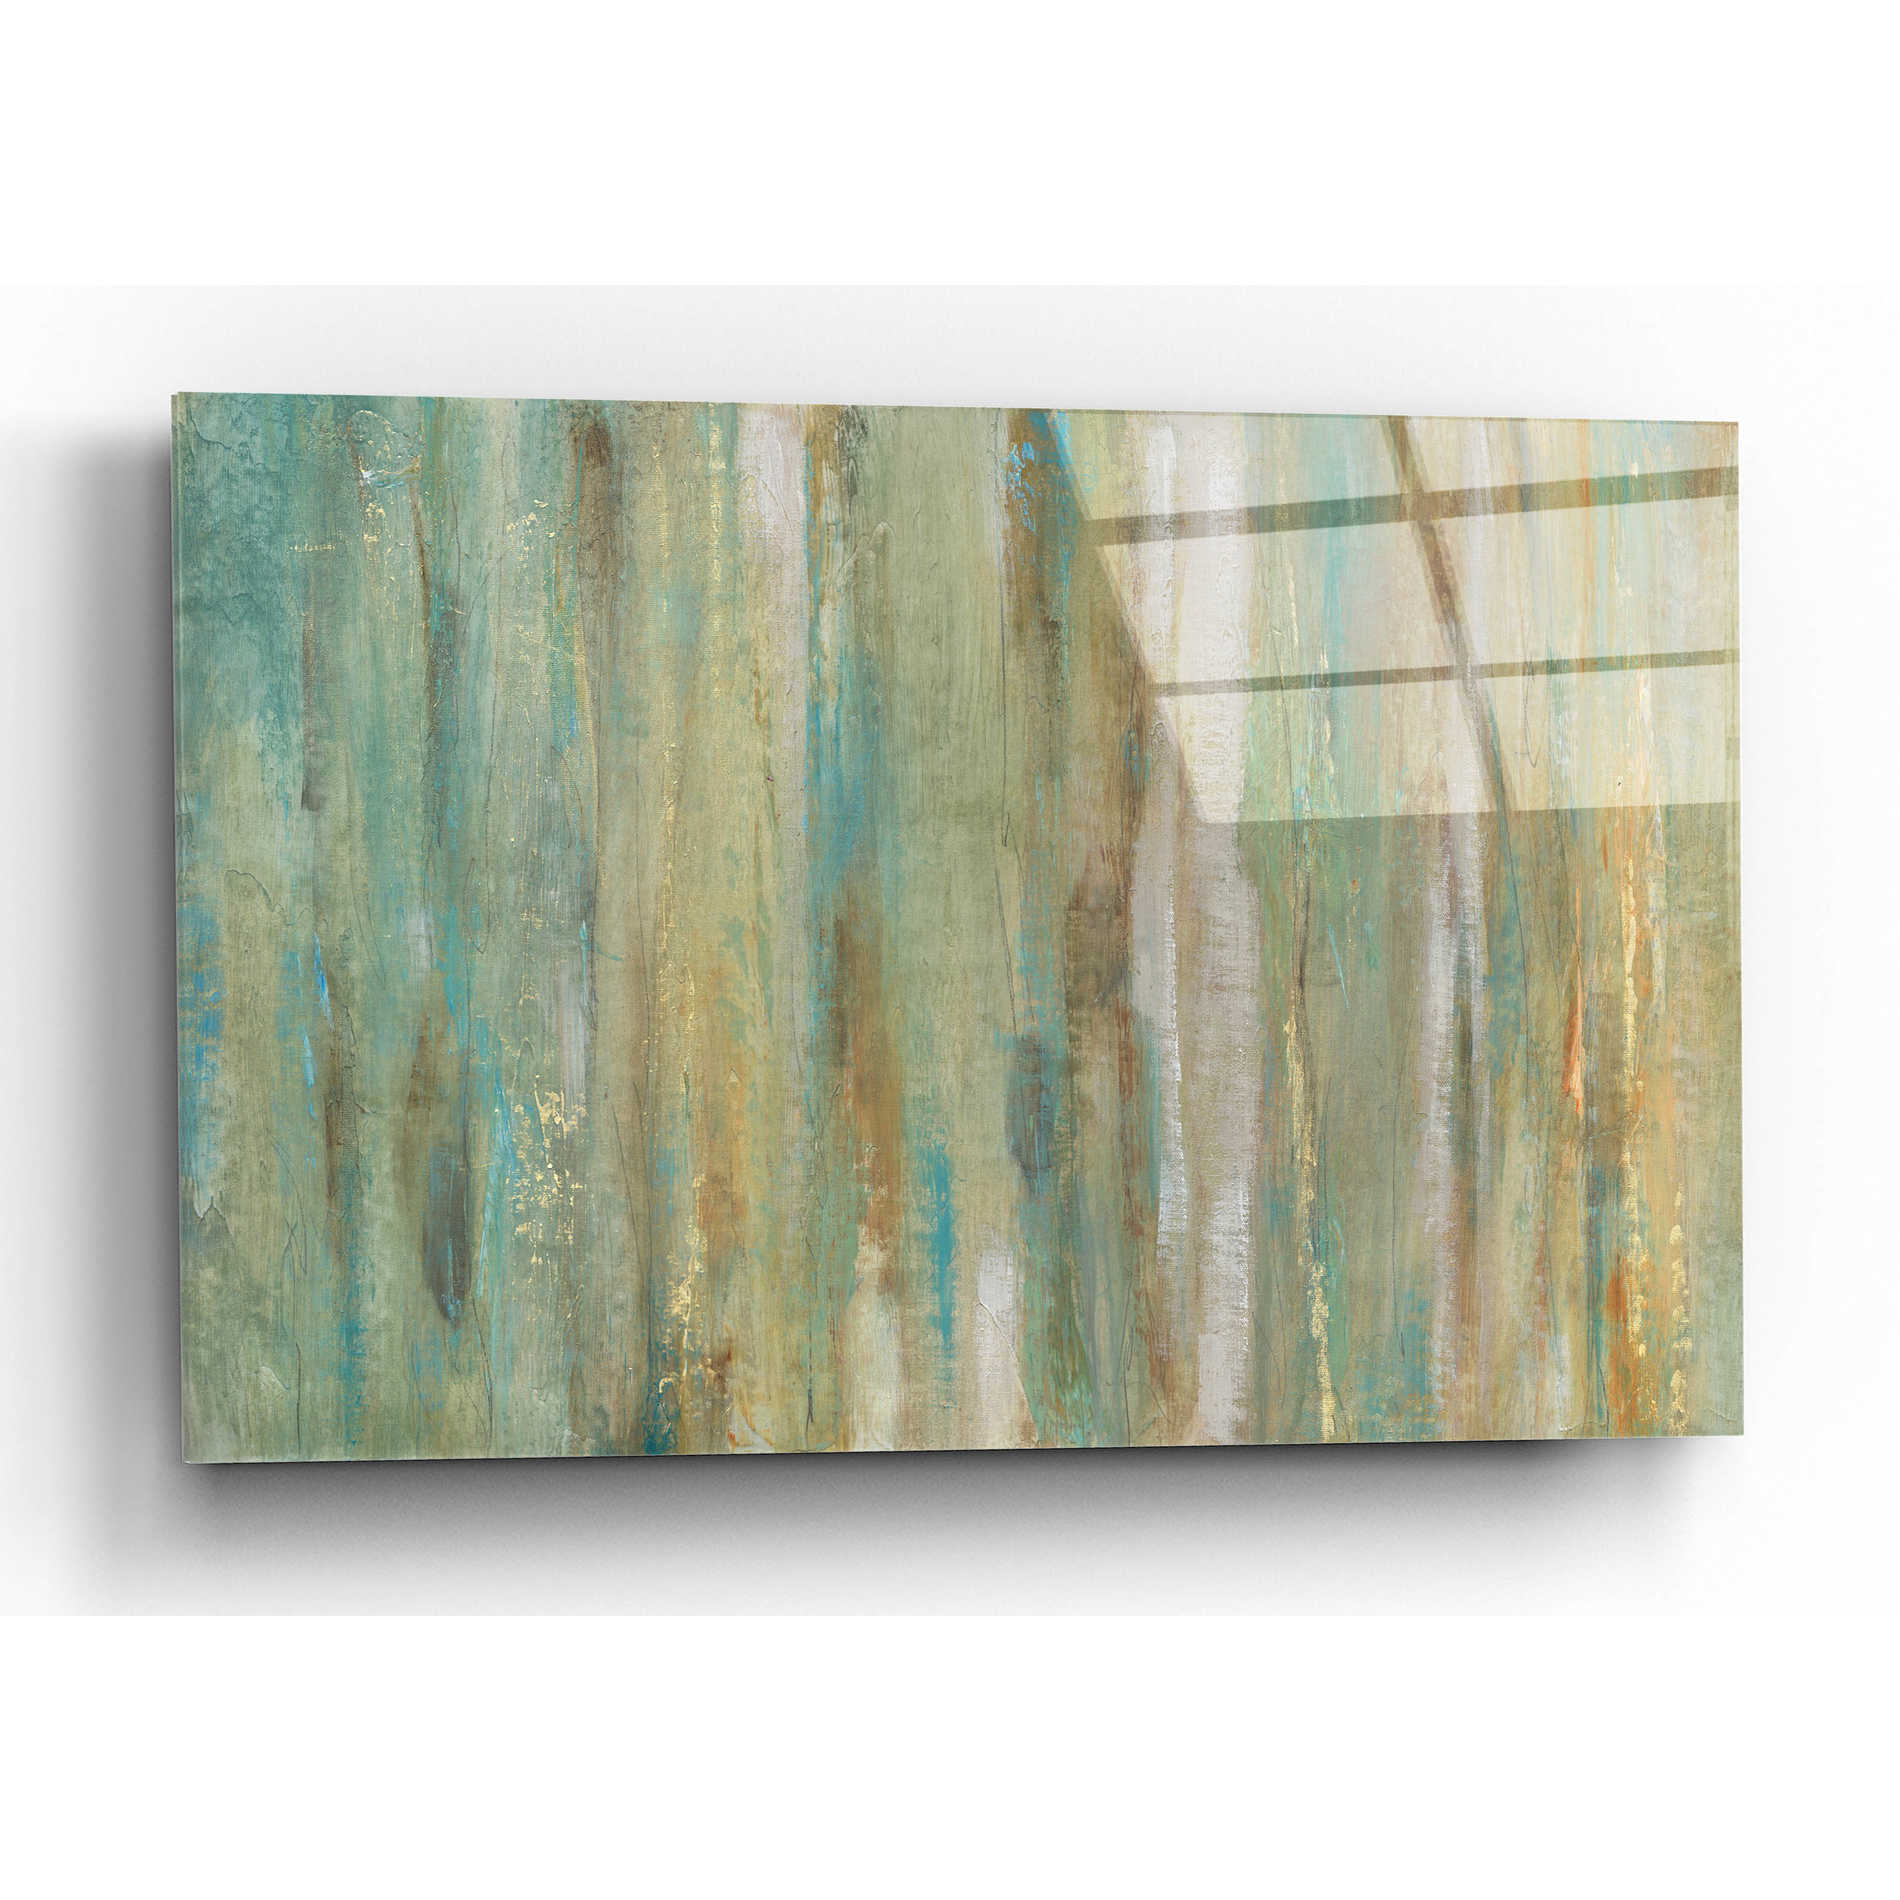 Epic Art 'Vertical Flow I' by Tim O'Toole, Acrylic Glass Wall Art